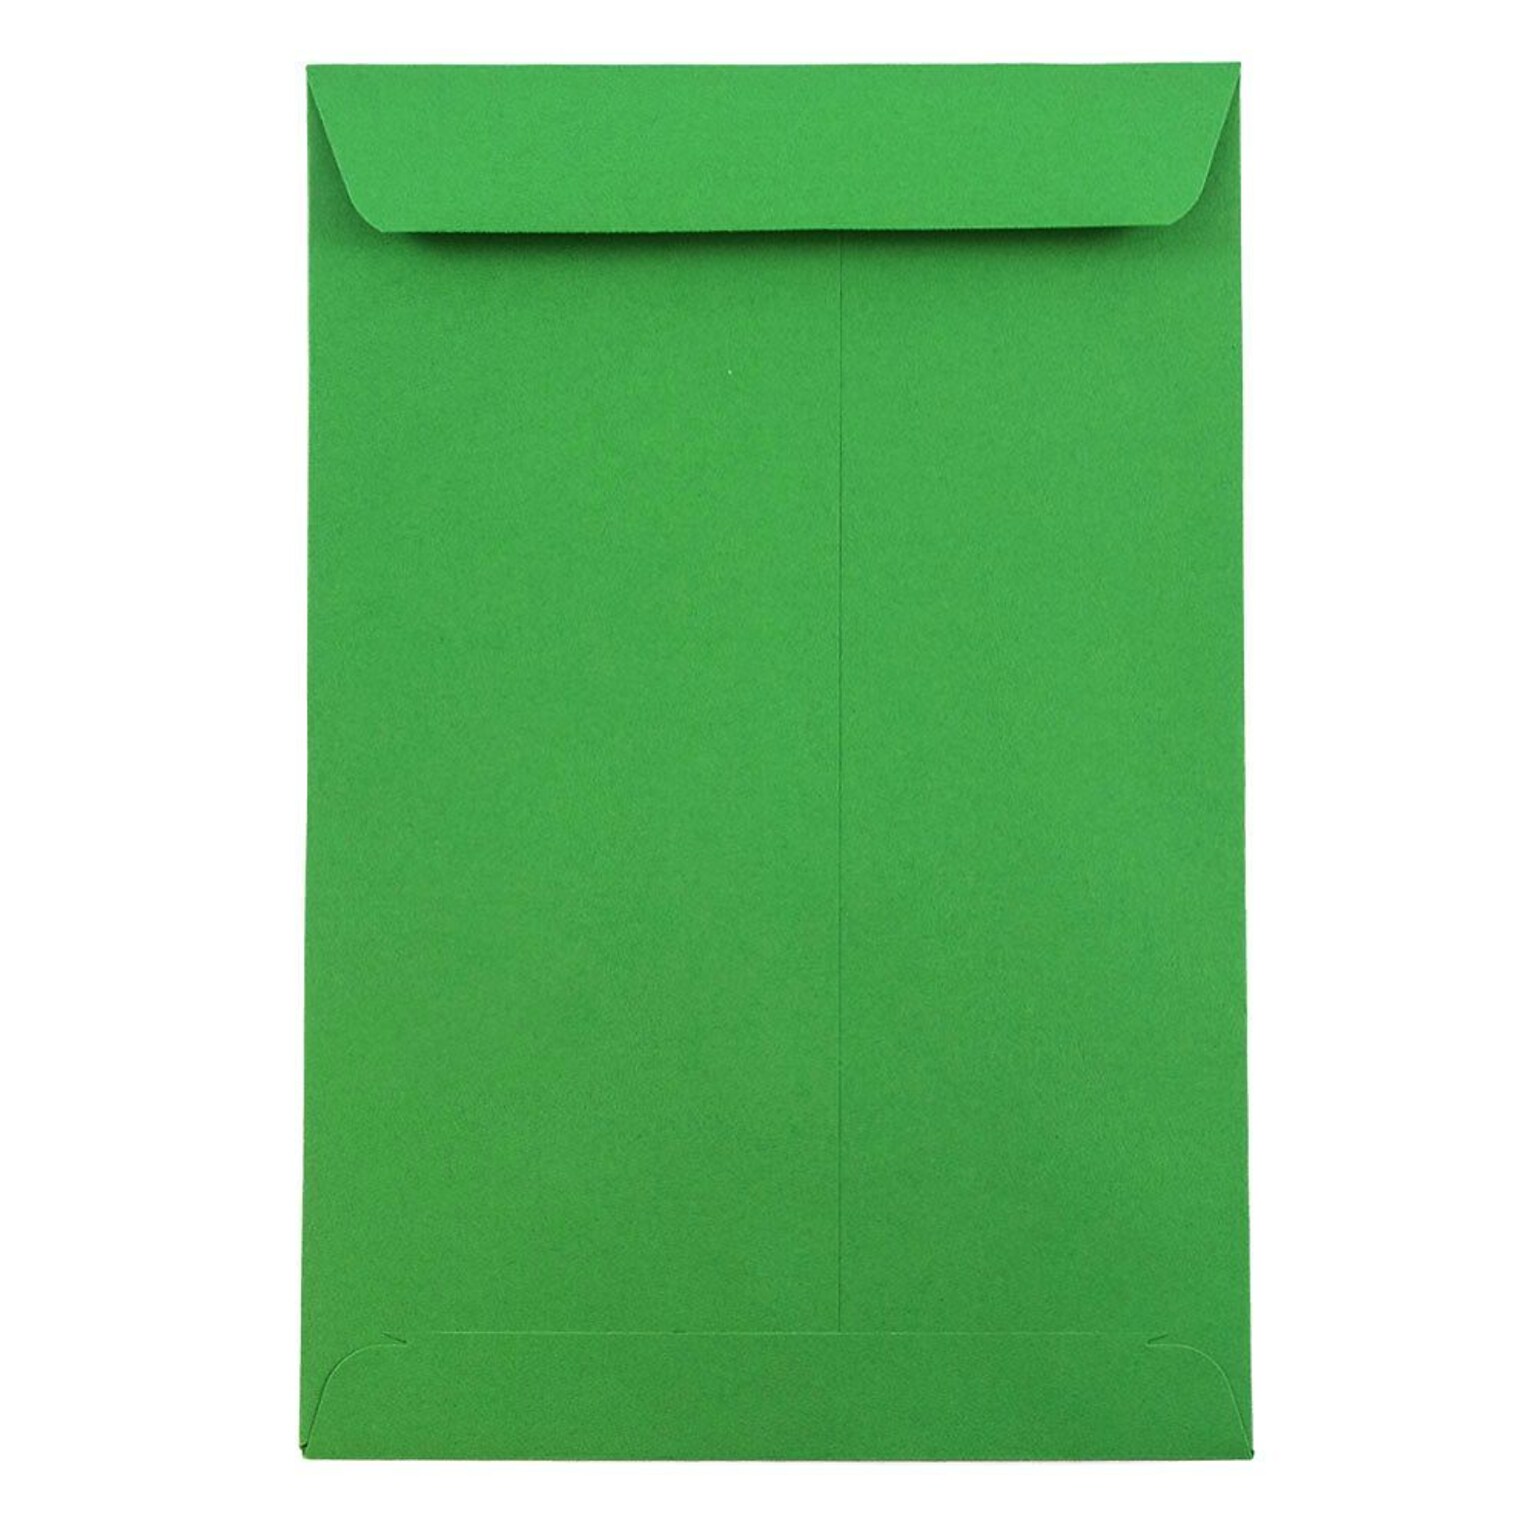 JAM Paper 6 x 9 Open End Catalog Colored Envelopes, Green Recycled, 25/Pack (88103a)